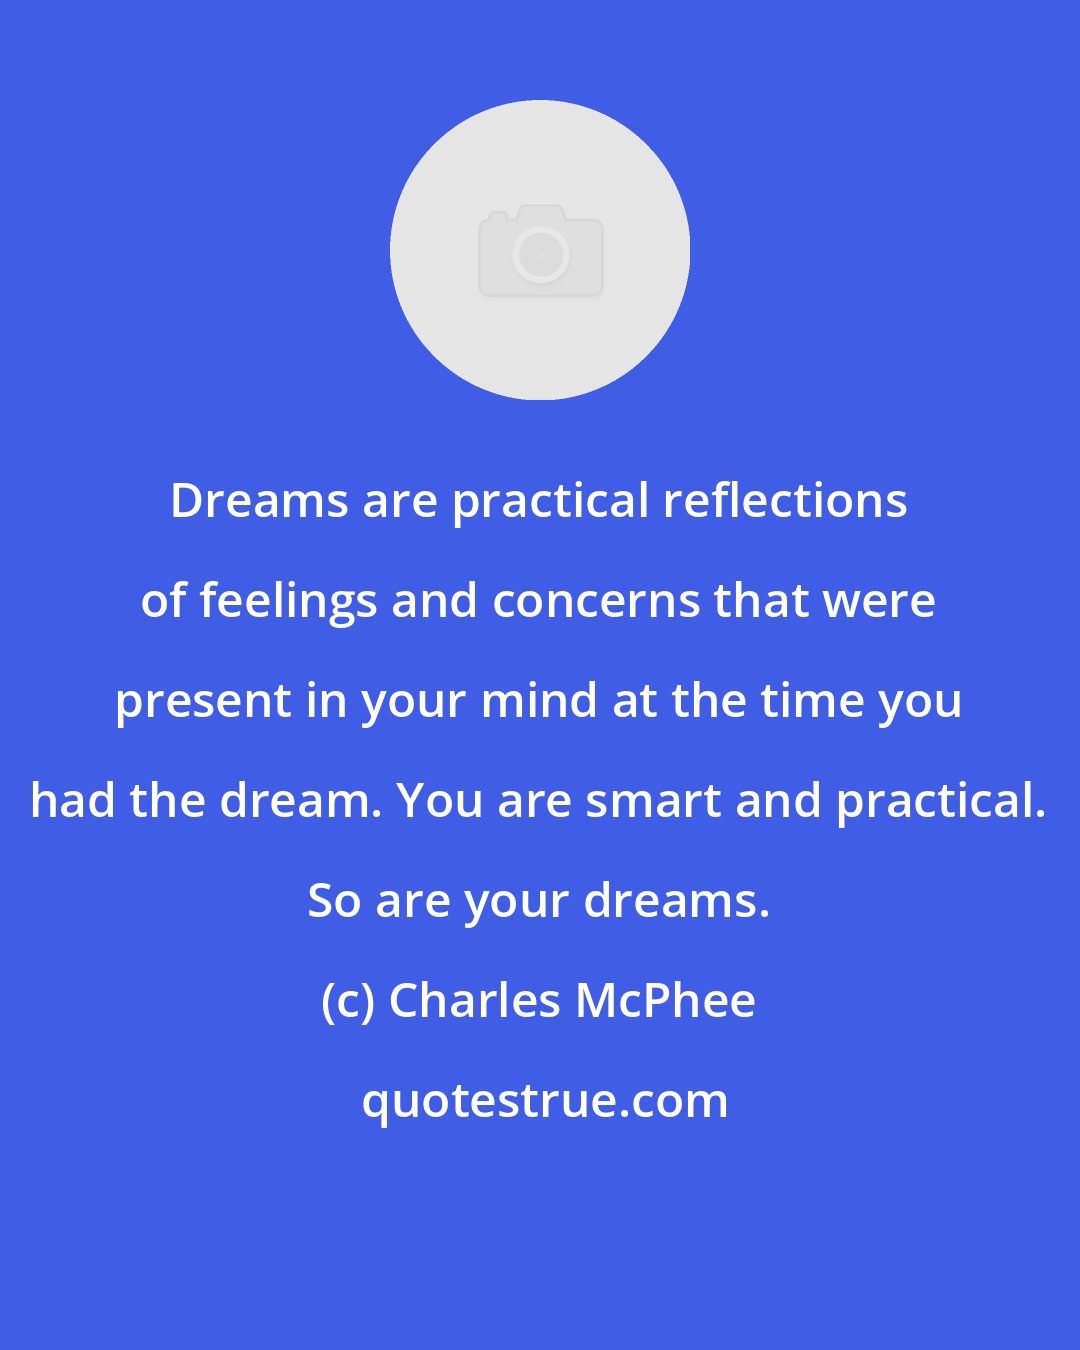 Charles McPhee: Dreams are practical reflections of feelings and concerns that were present in your mind at the time you had the dream. You are smart and practical. So are your dreams.